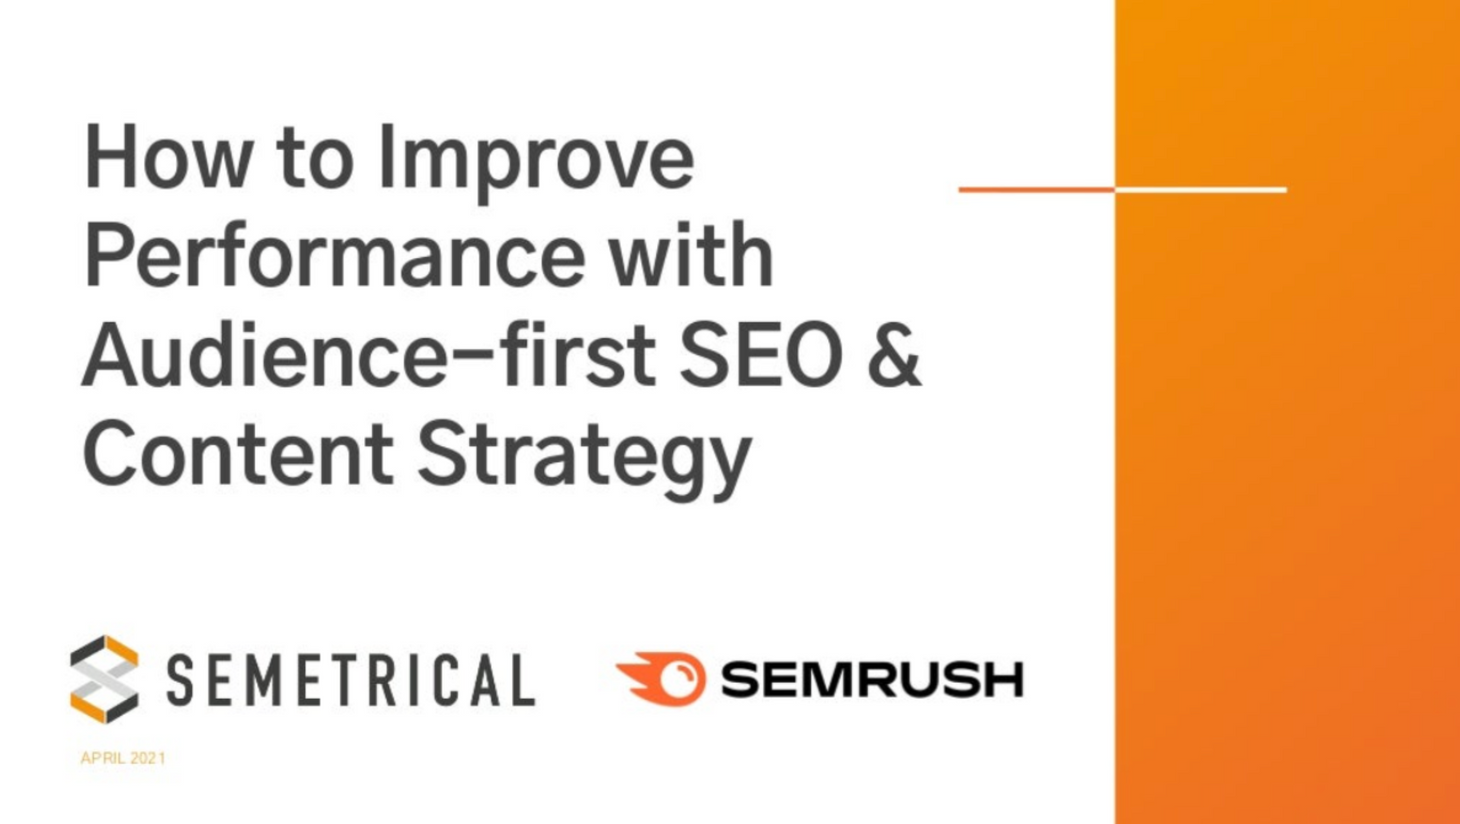 How To Improve Performance With Audience-first SEO & Content Strategy